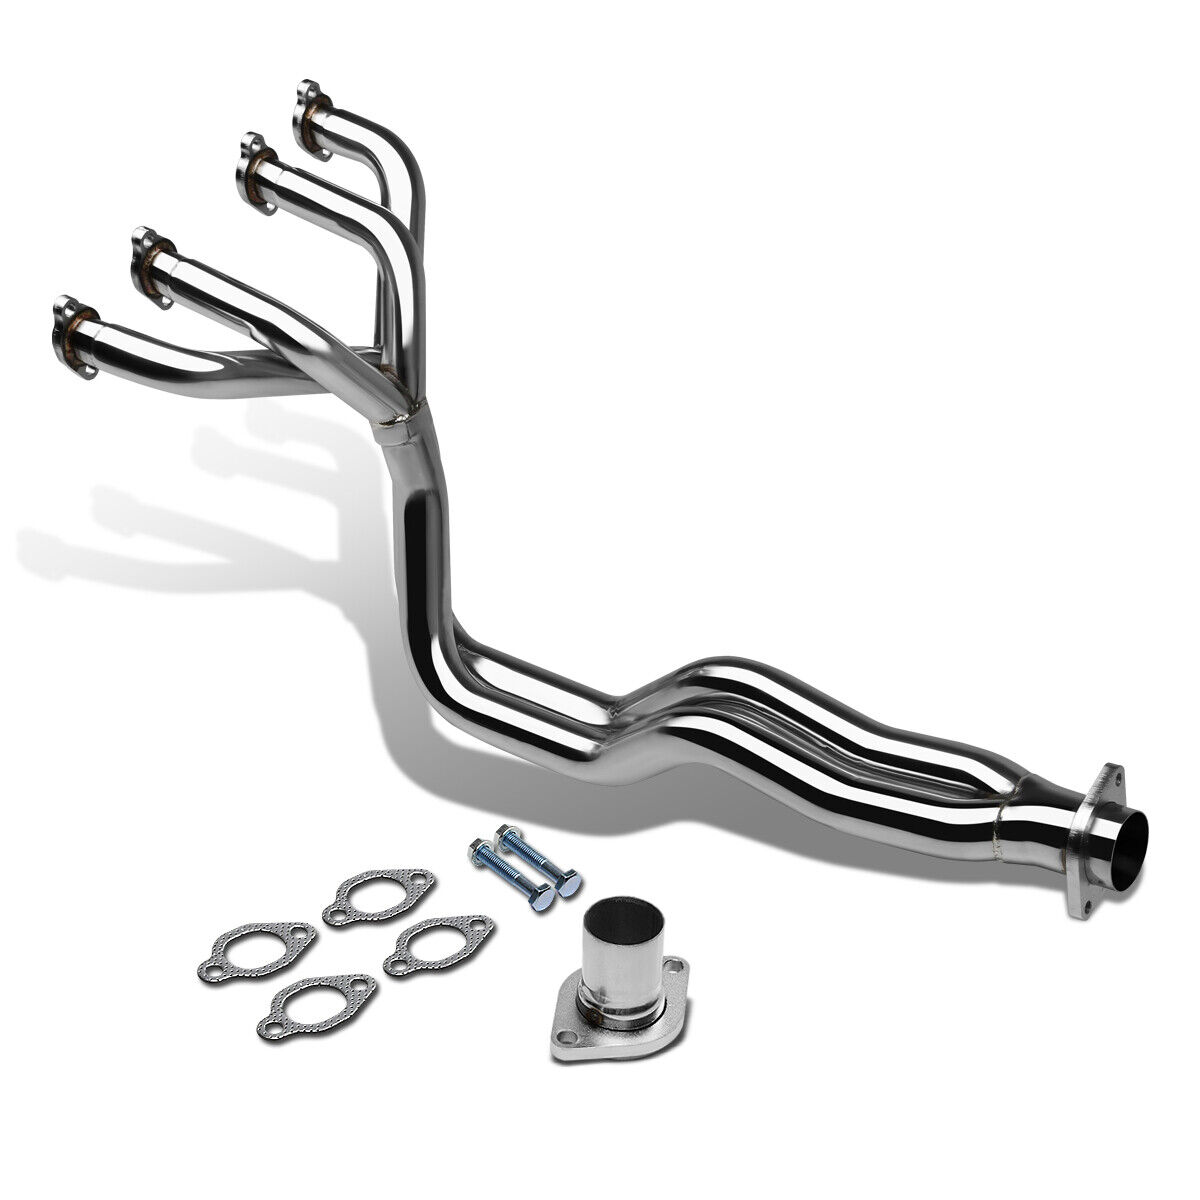 Fit Scirocco/Cabriolet/Jetta/Rabbit/Gti Stainless Racing Header Manifold/Exhaust